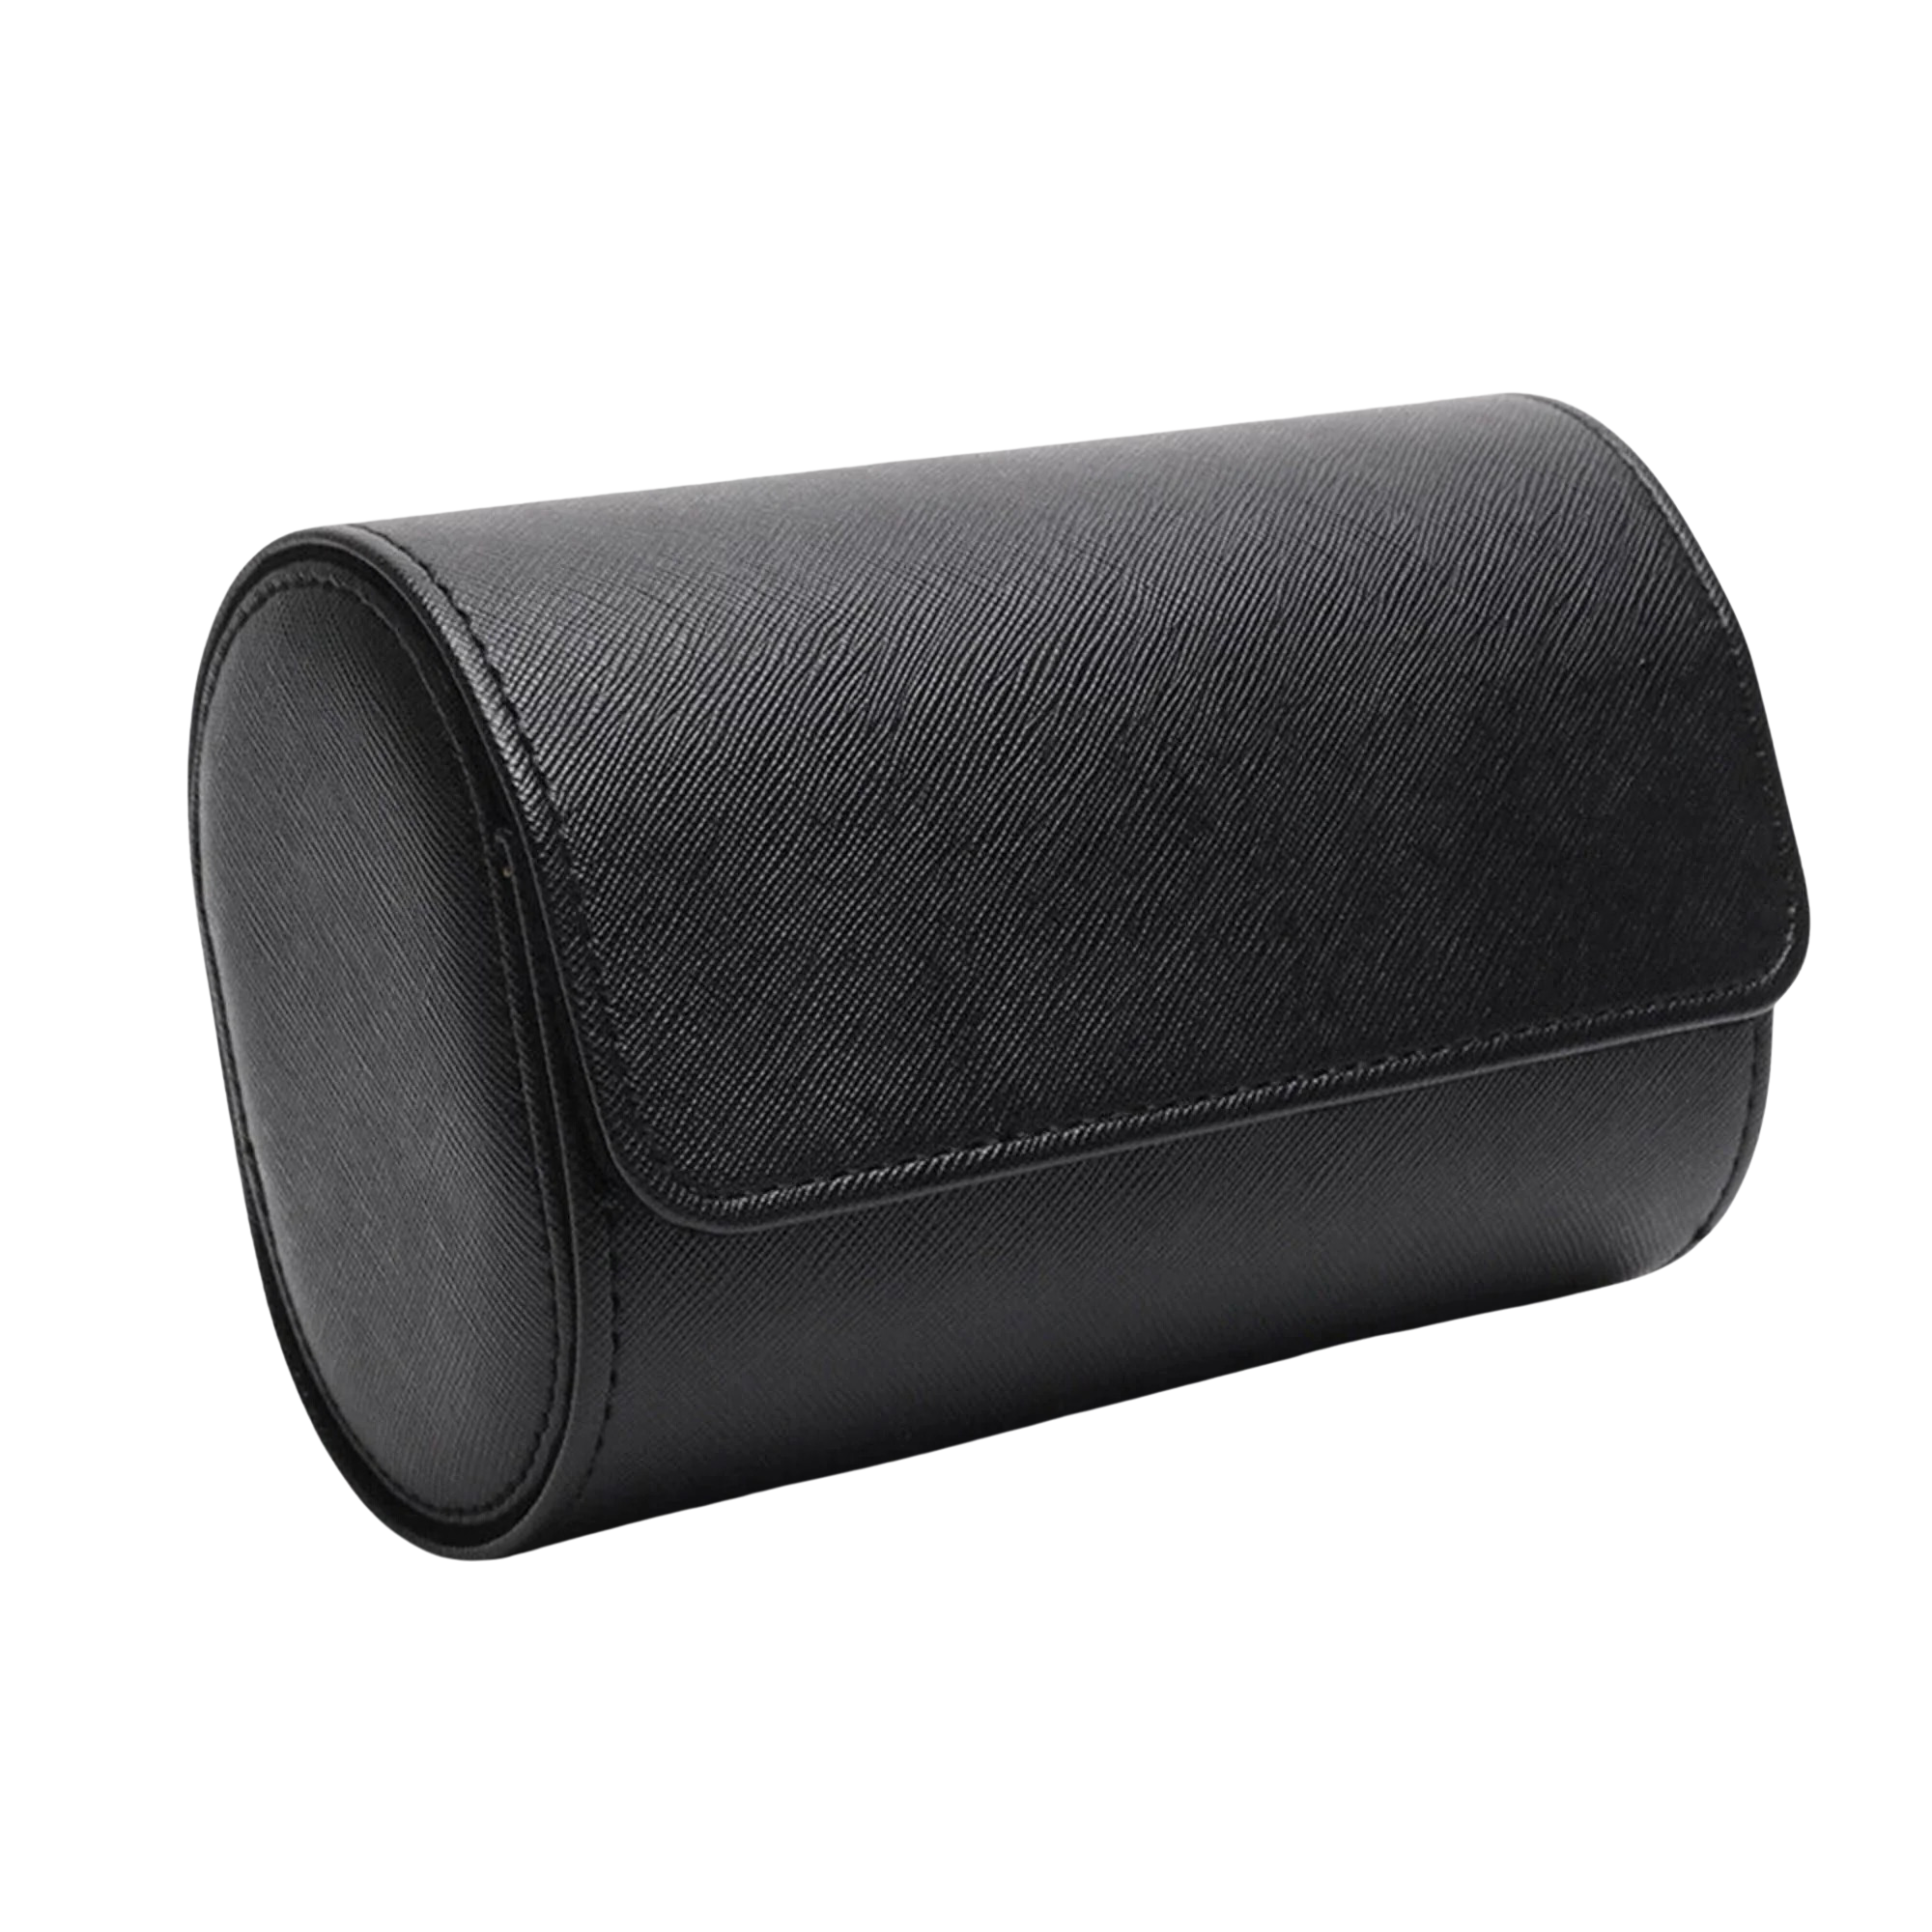 Watch Roll Case for 2 in Black Vegan Leather